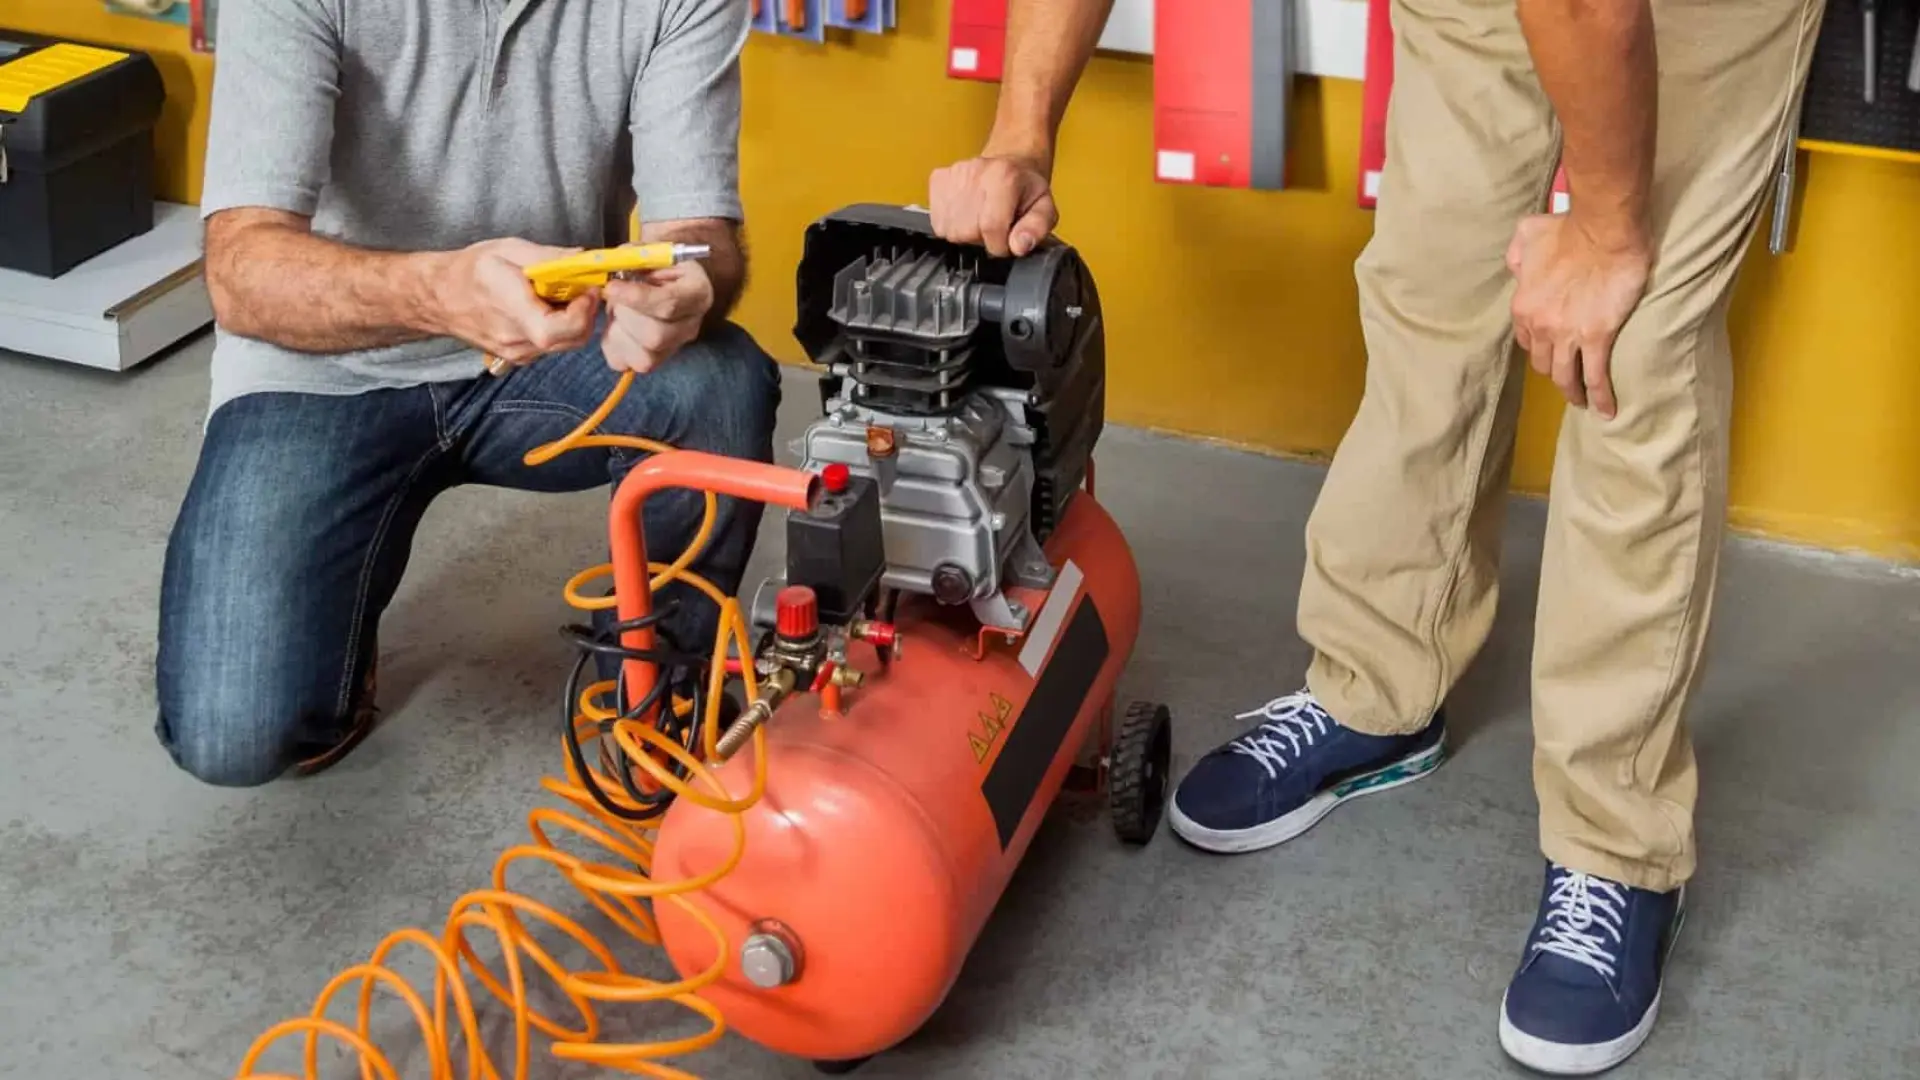 How Does an Air Compressor Work